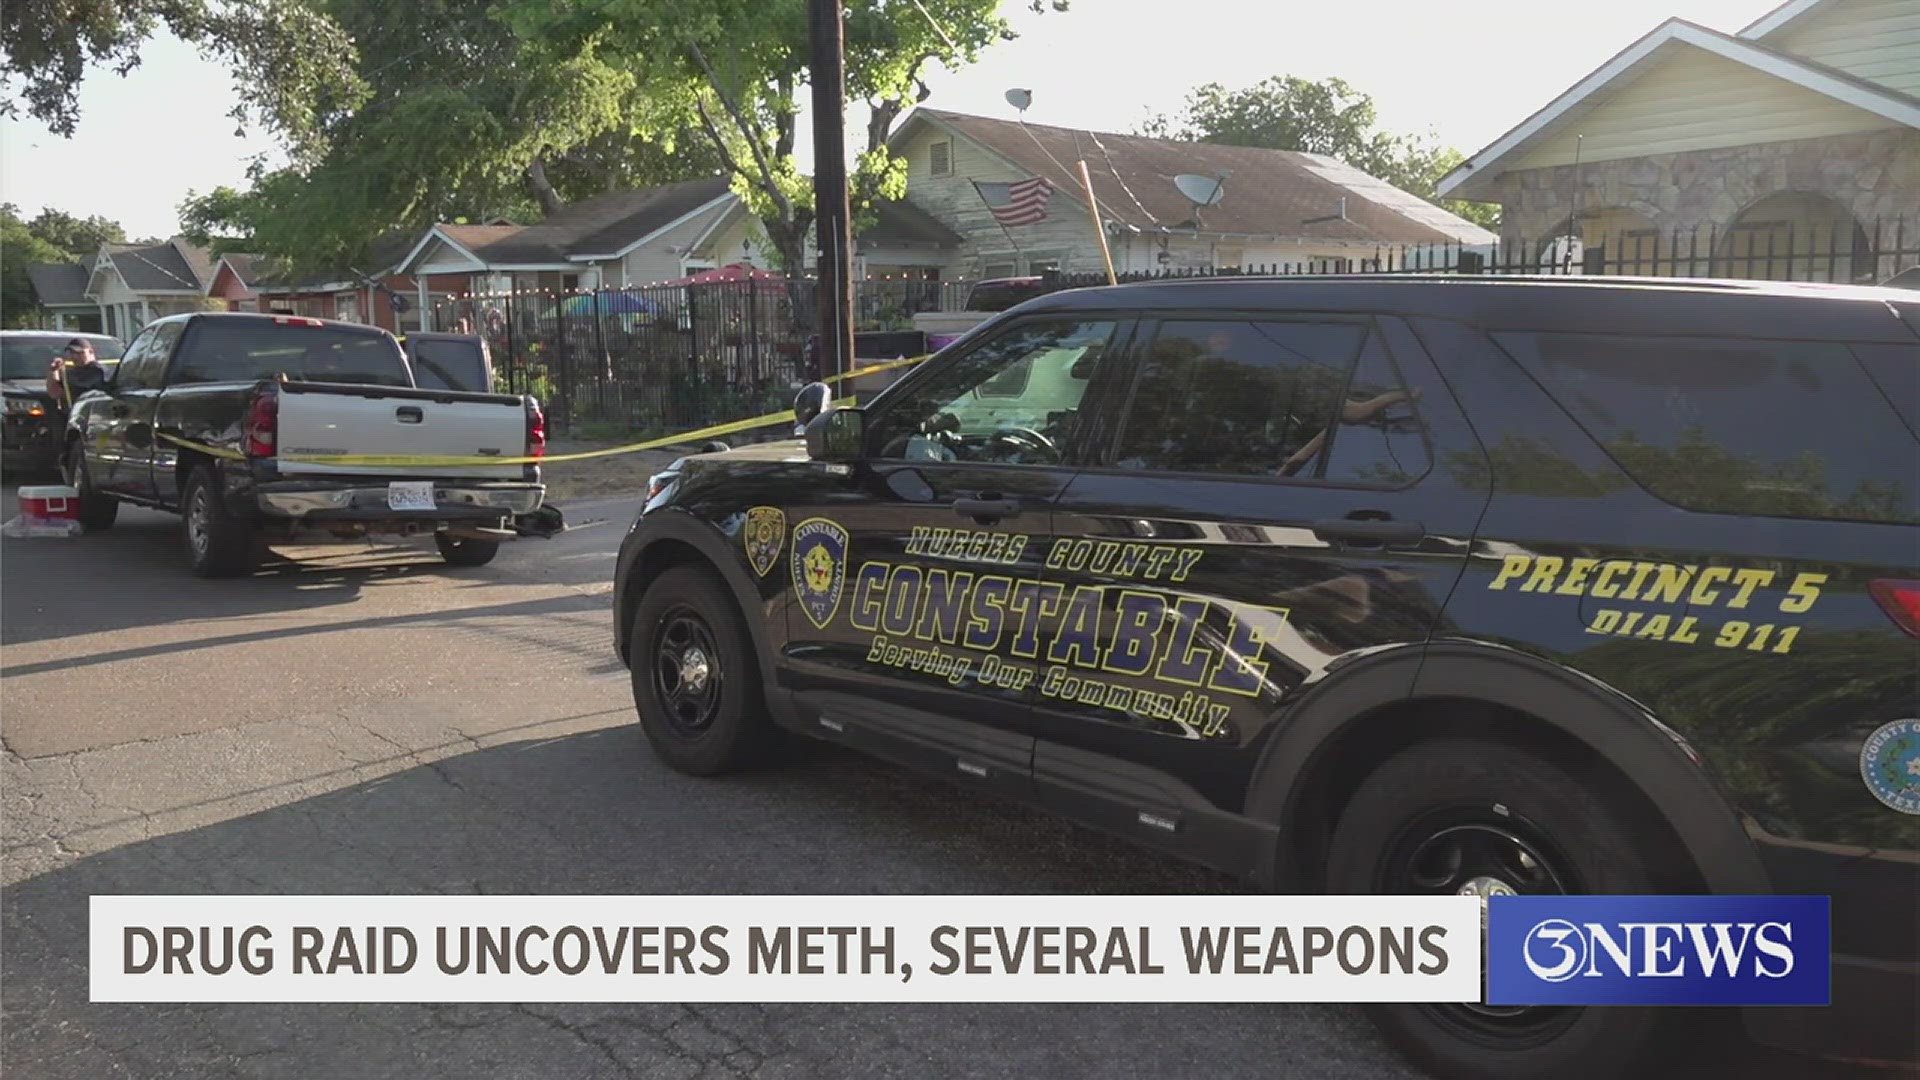 Weapons and crystal meth were found in and outside of the home, officials on scene said.